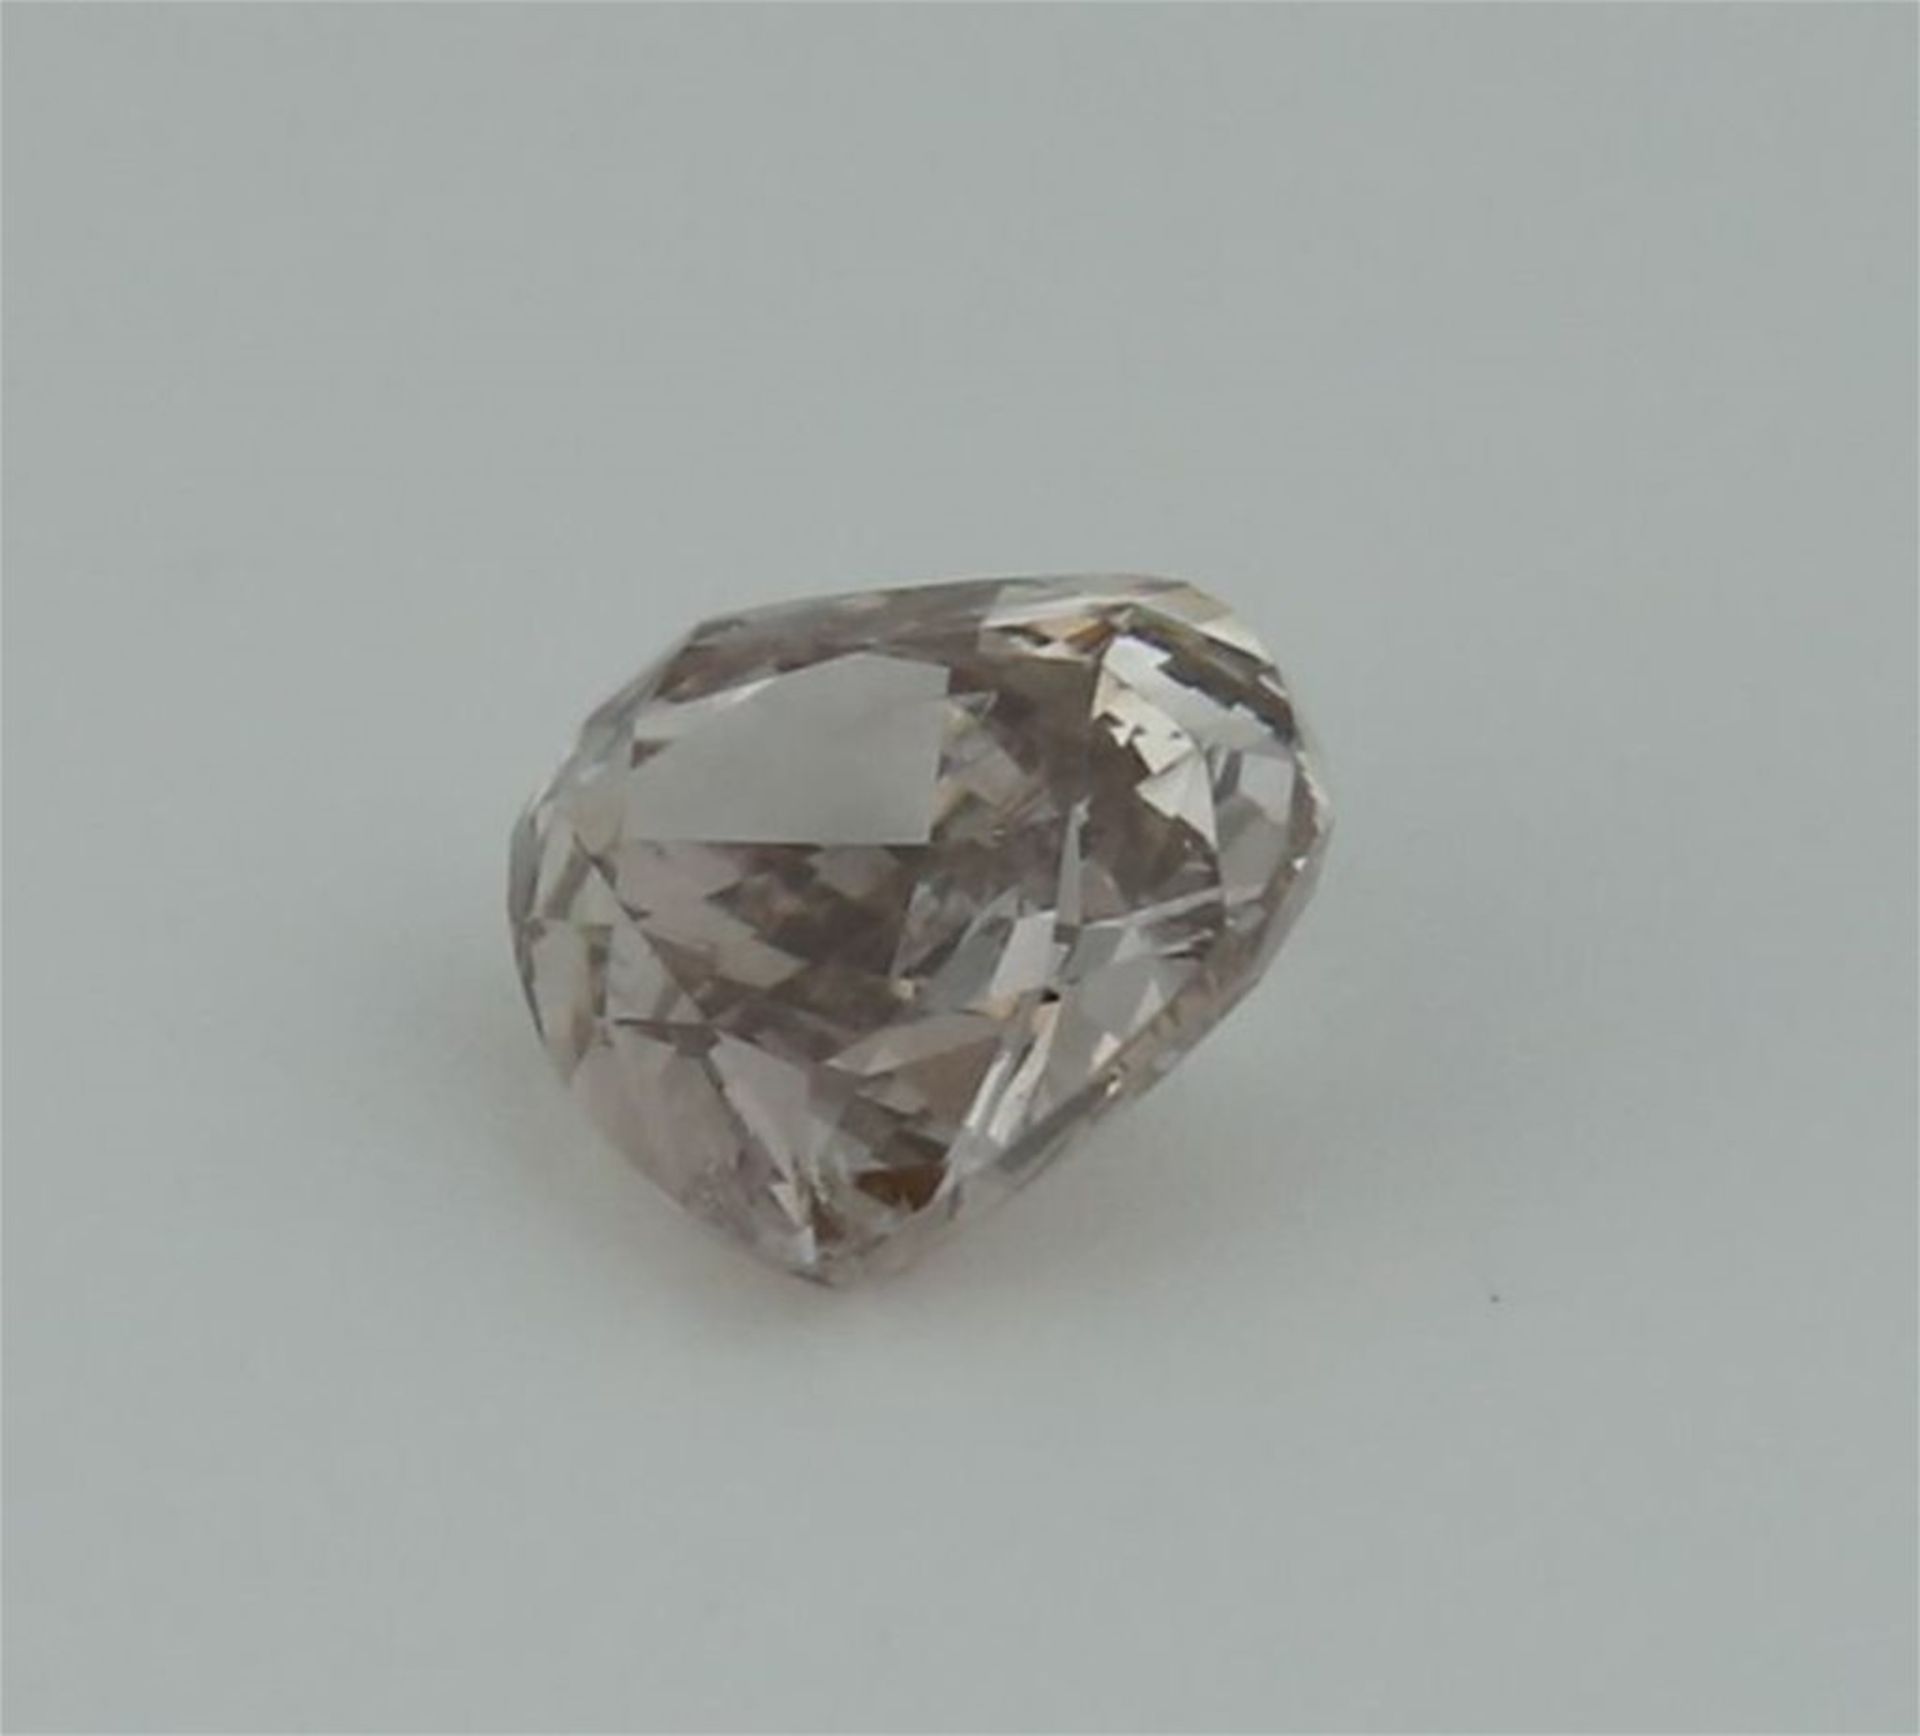 IGI Certified 0.52 ct. Pear Modified Brilliant Diamond - Very Light Brown - SI 2 UNTREATED - Image 4 of 9